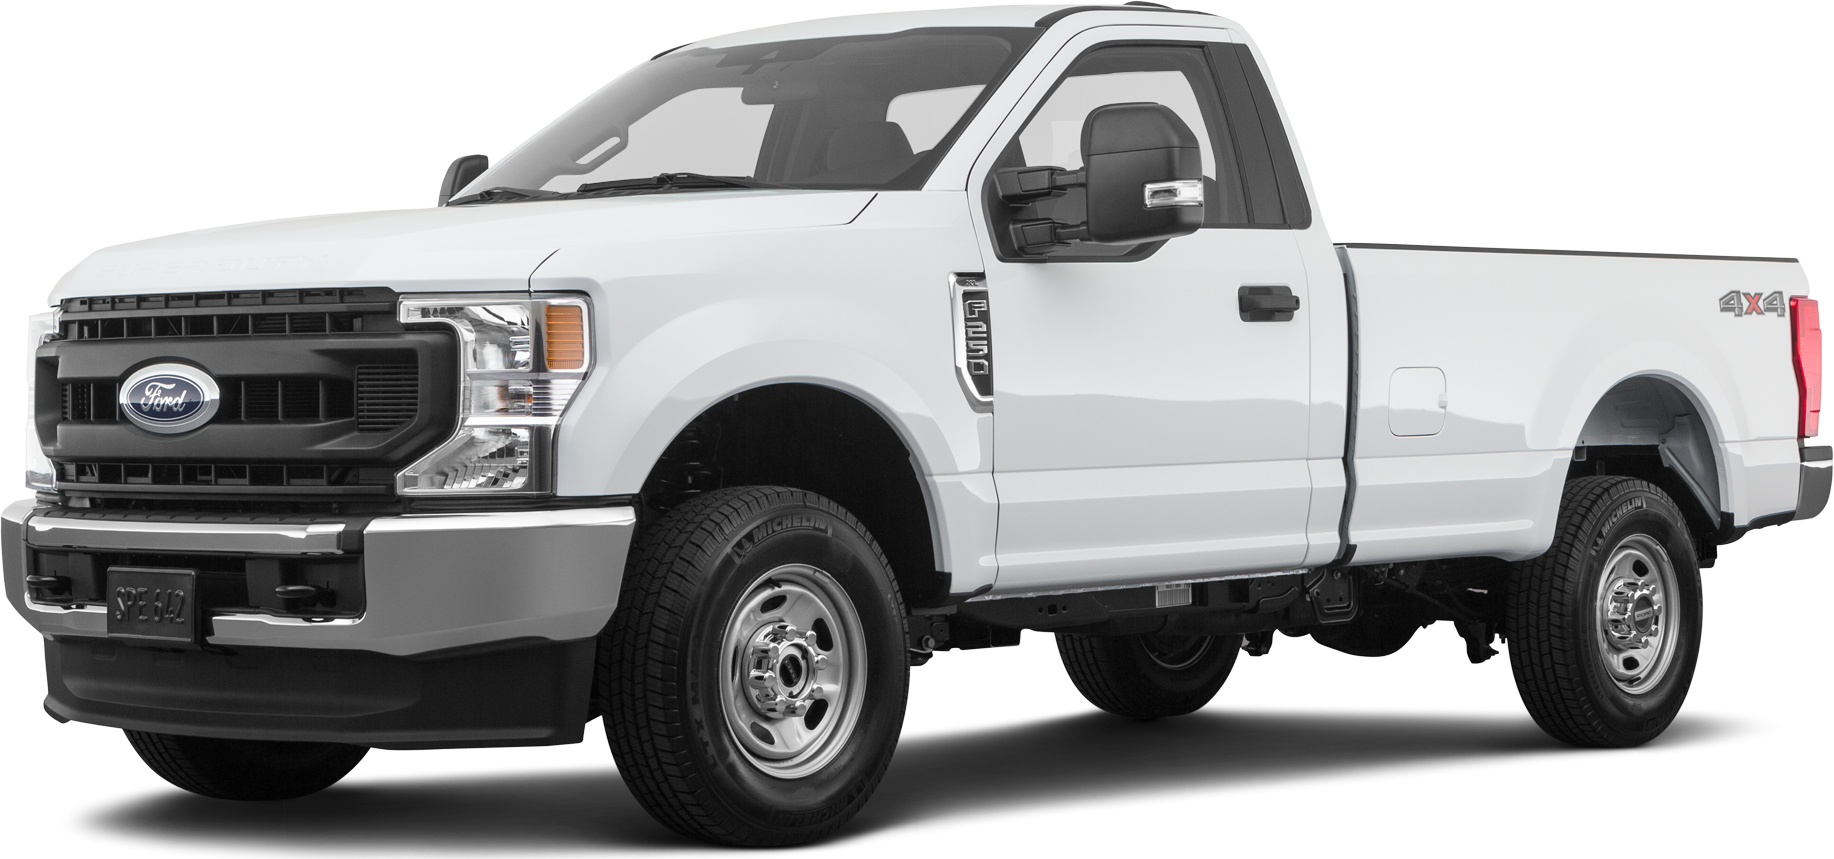 2020 Ford F250 Super Duty Regular Cab Price, Value, Ratings 